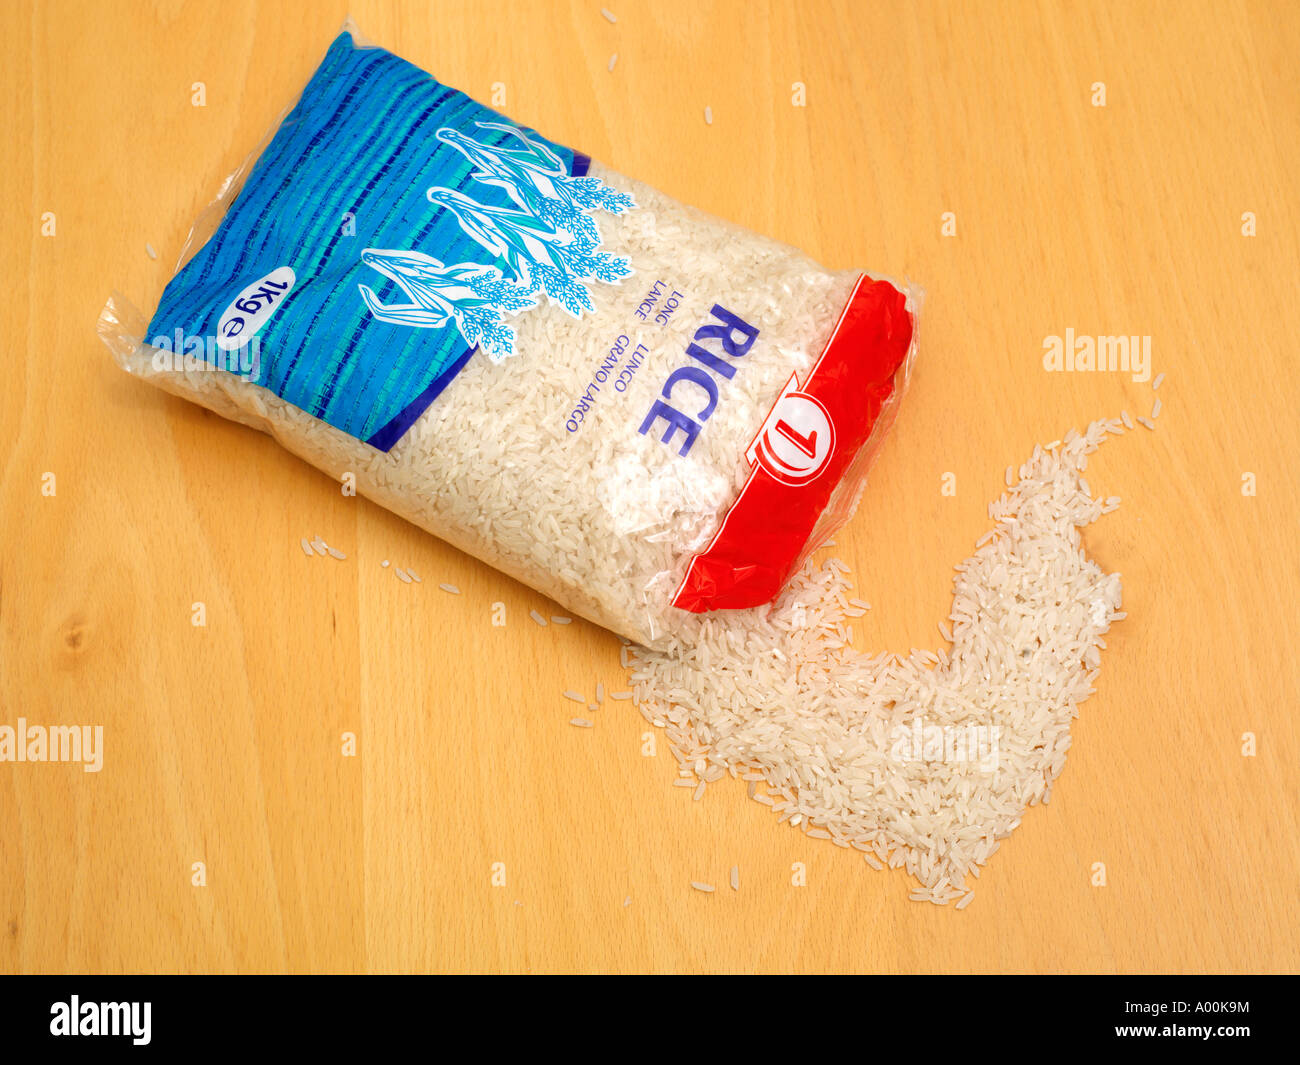 Bag of Long Grain Rice with Some Spilling Out Stock Photo